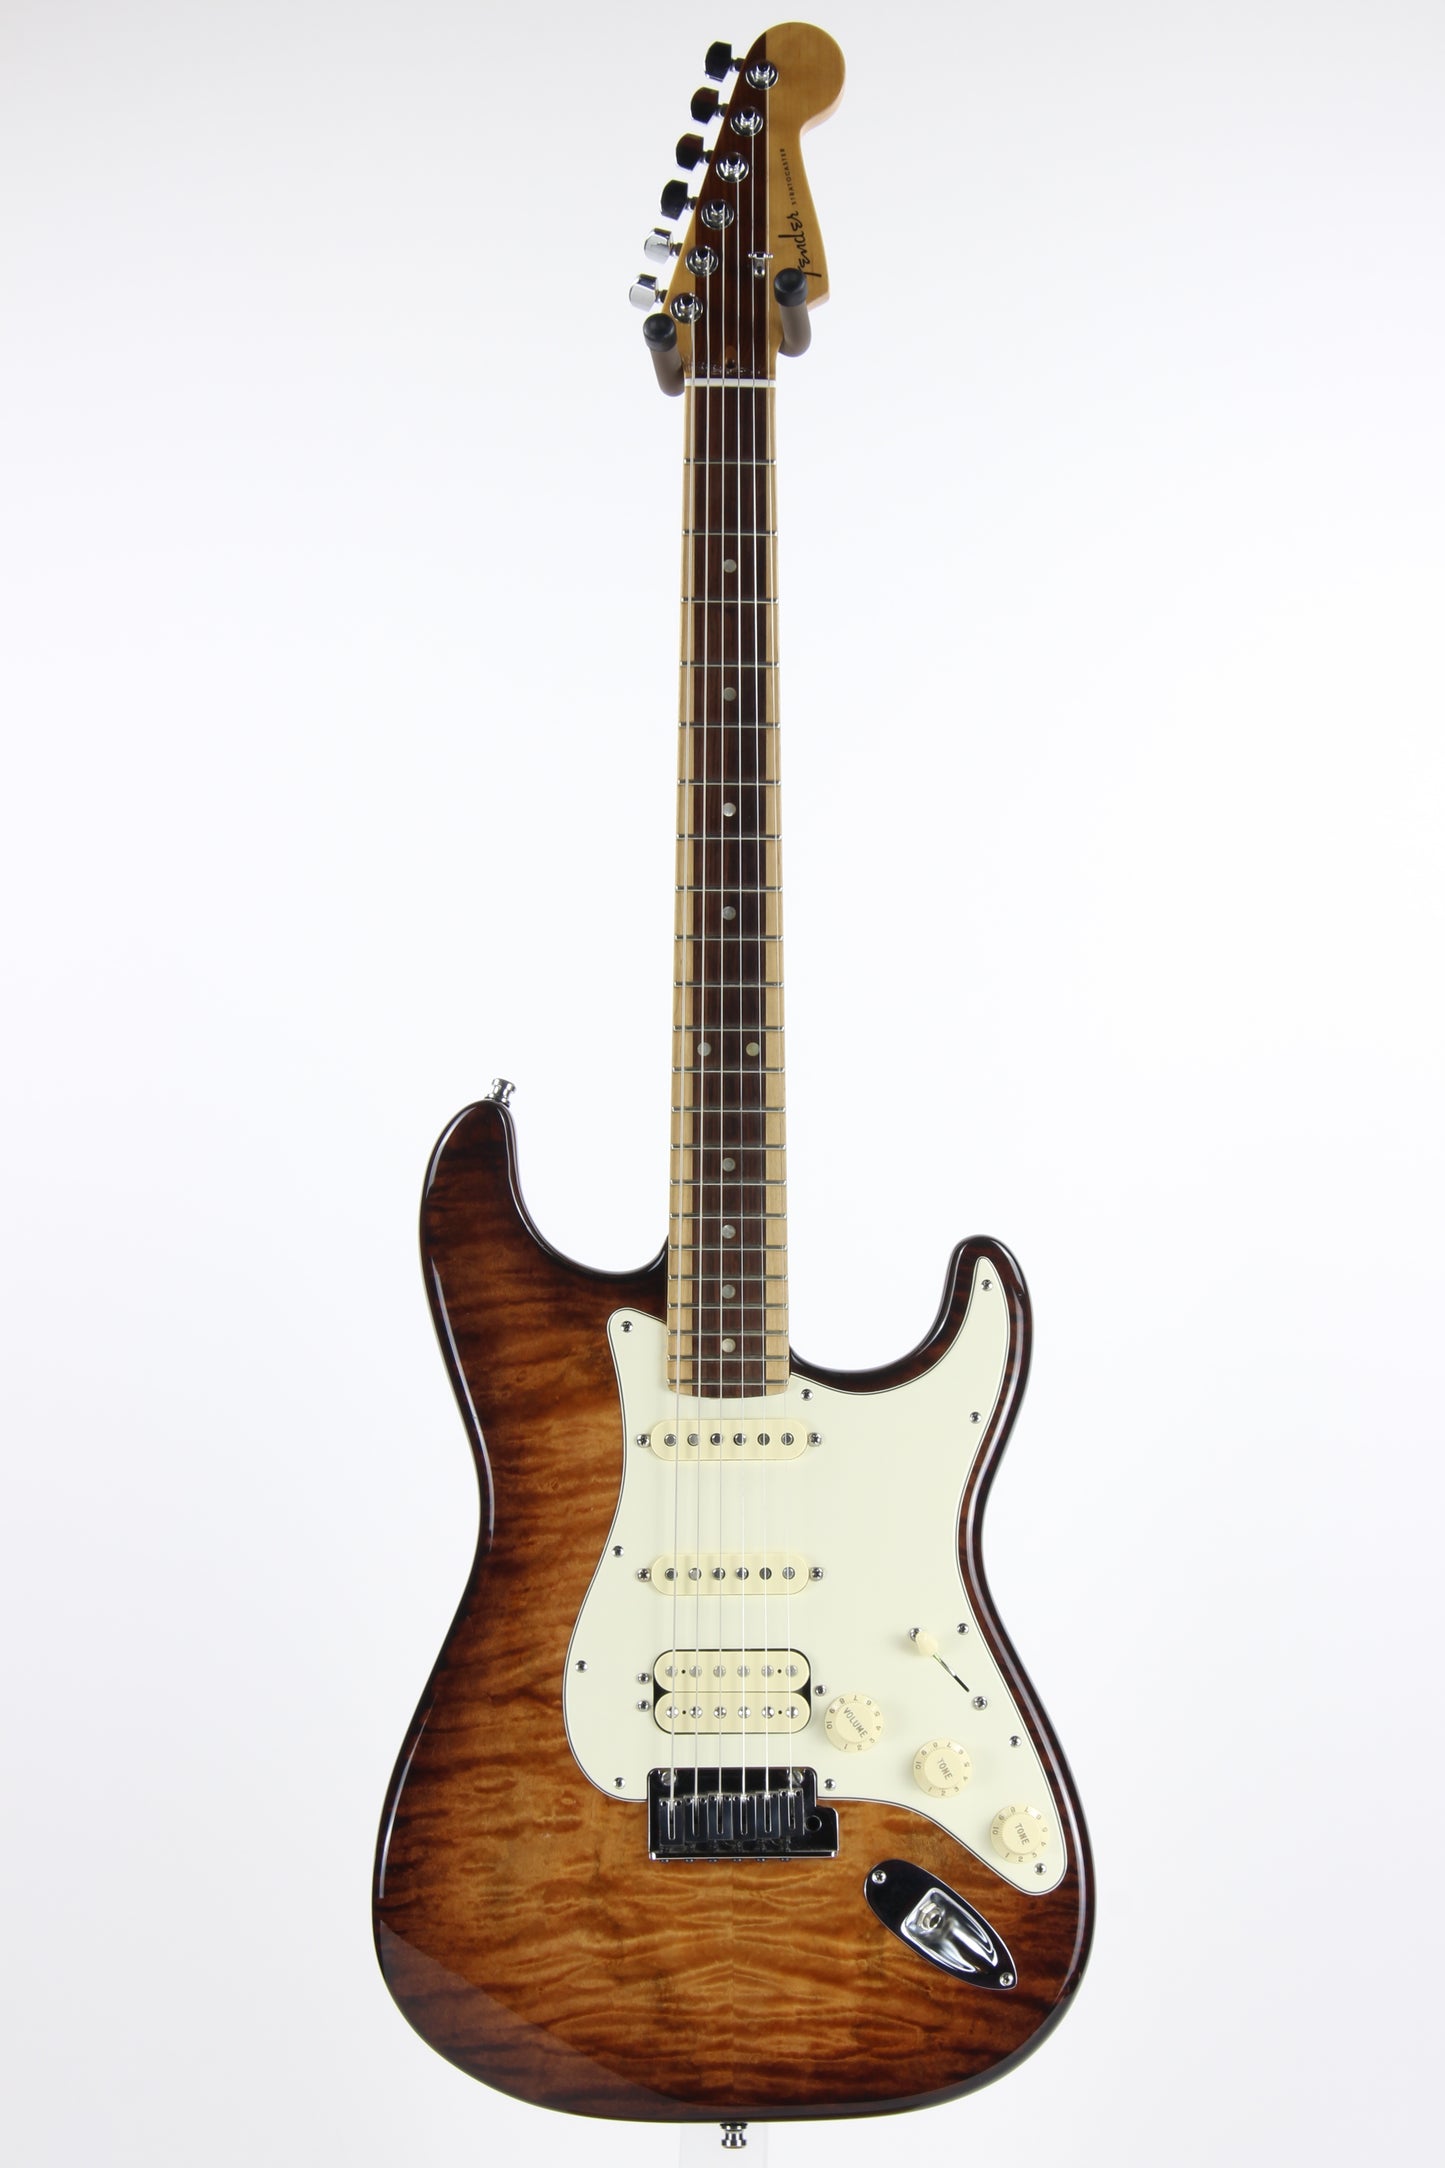 PROTOTYPE 2013 Fender American Select Stratocaster HSS Exotic Maple Quilt - One-of-a-Kind!